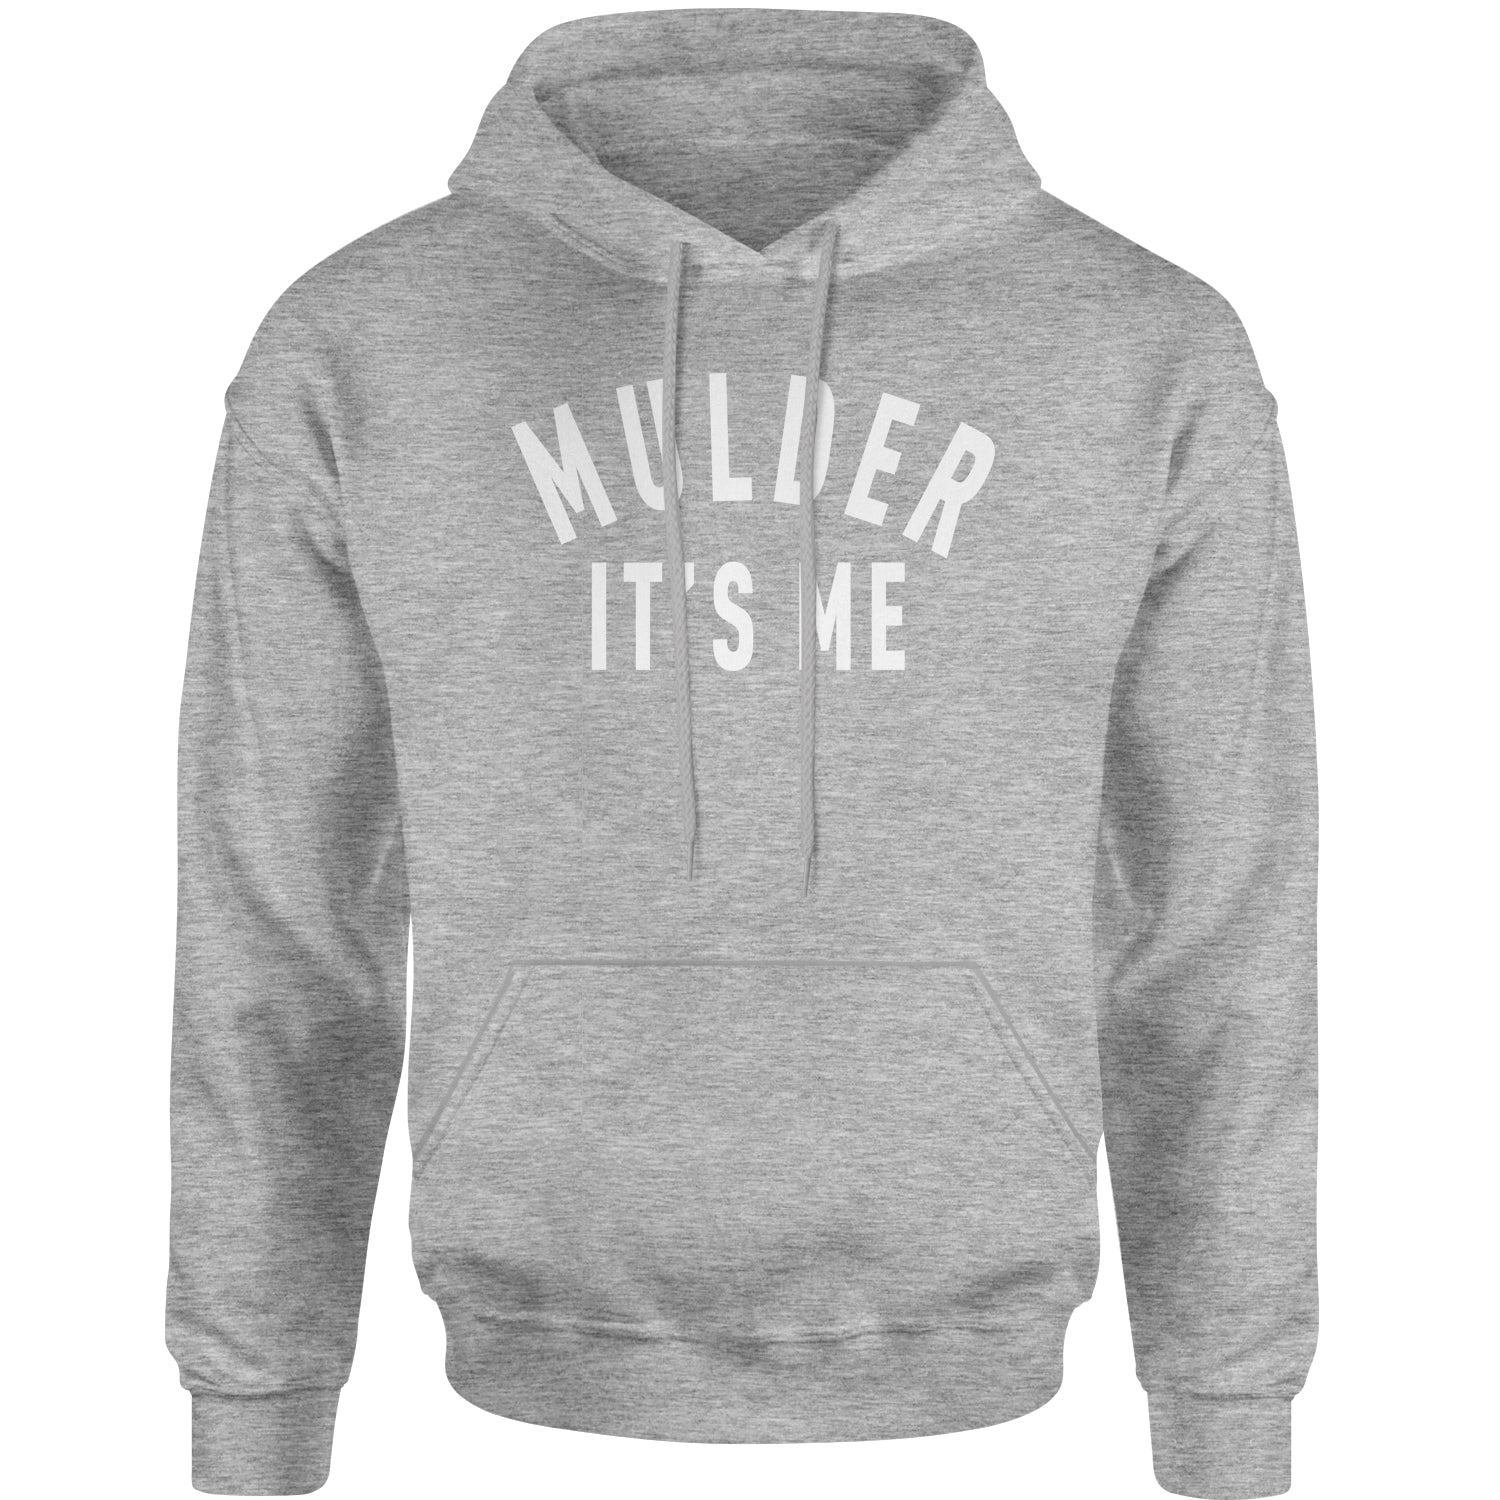 Mulder, It's Me Adult Hoodie Sweatshirt 51, area, believe, files, is, mulder, out, scully, the, there, truth, x, xfiles by Expression Tees